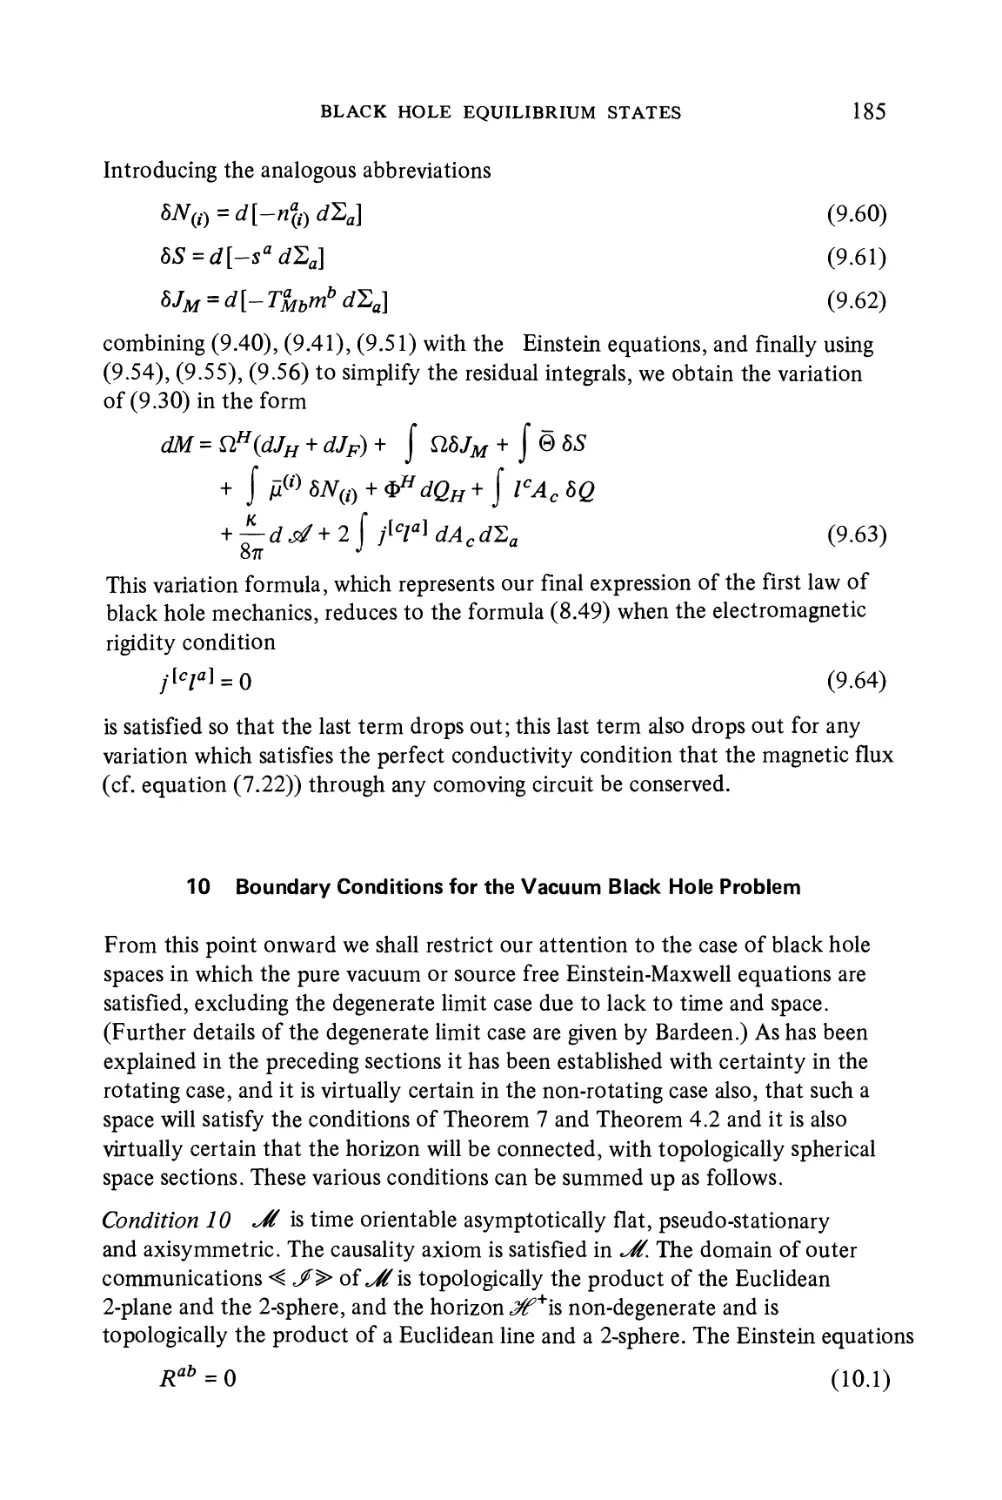 10 Boundary Conditions for the Vacuum Black Hole Problem